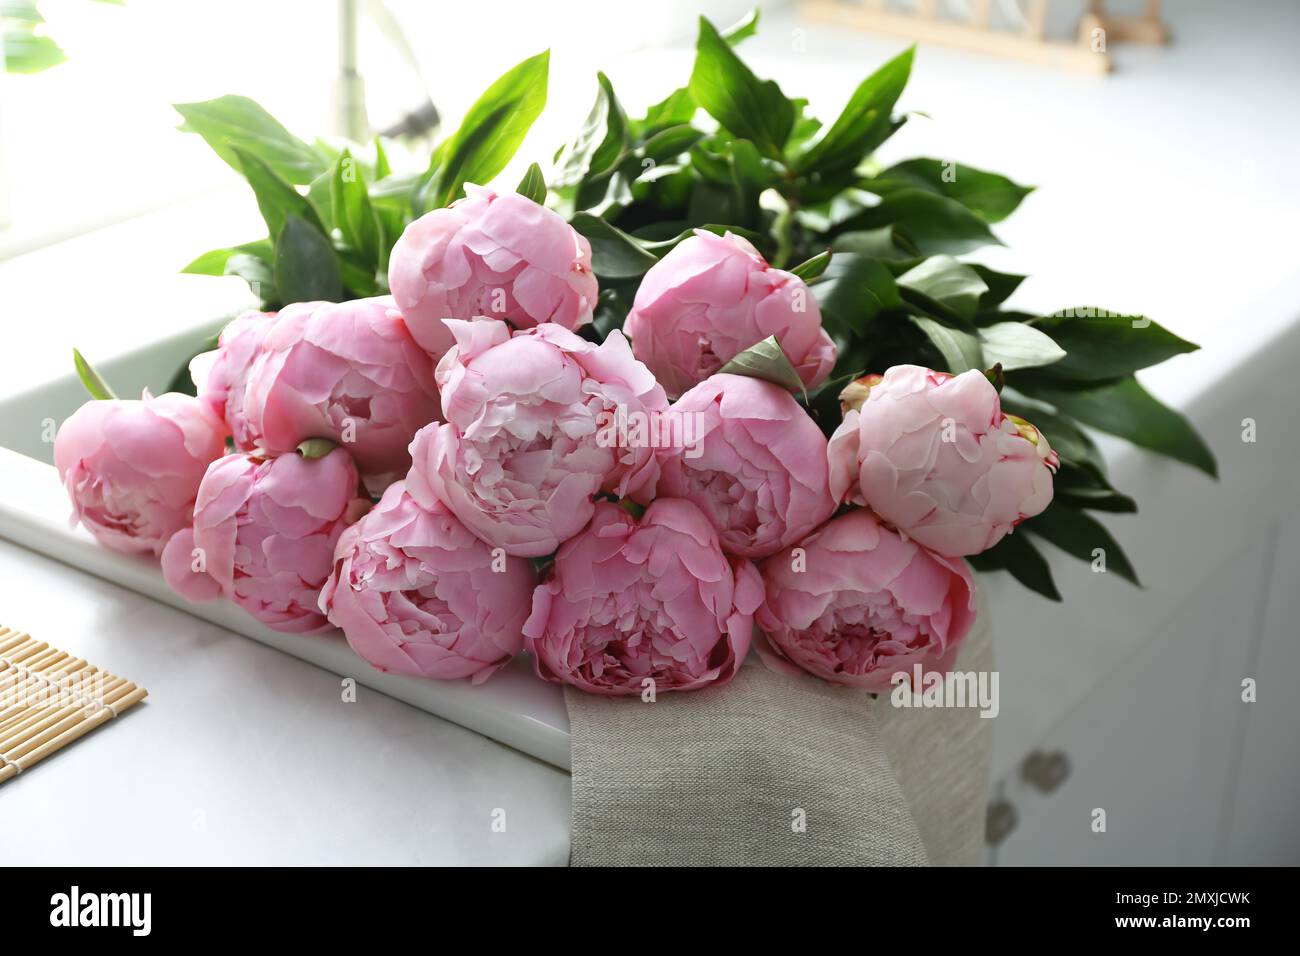 Bouquet of beautiful pink peonies on counter in kitchen Stock Photo